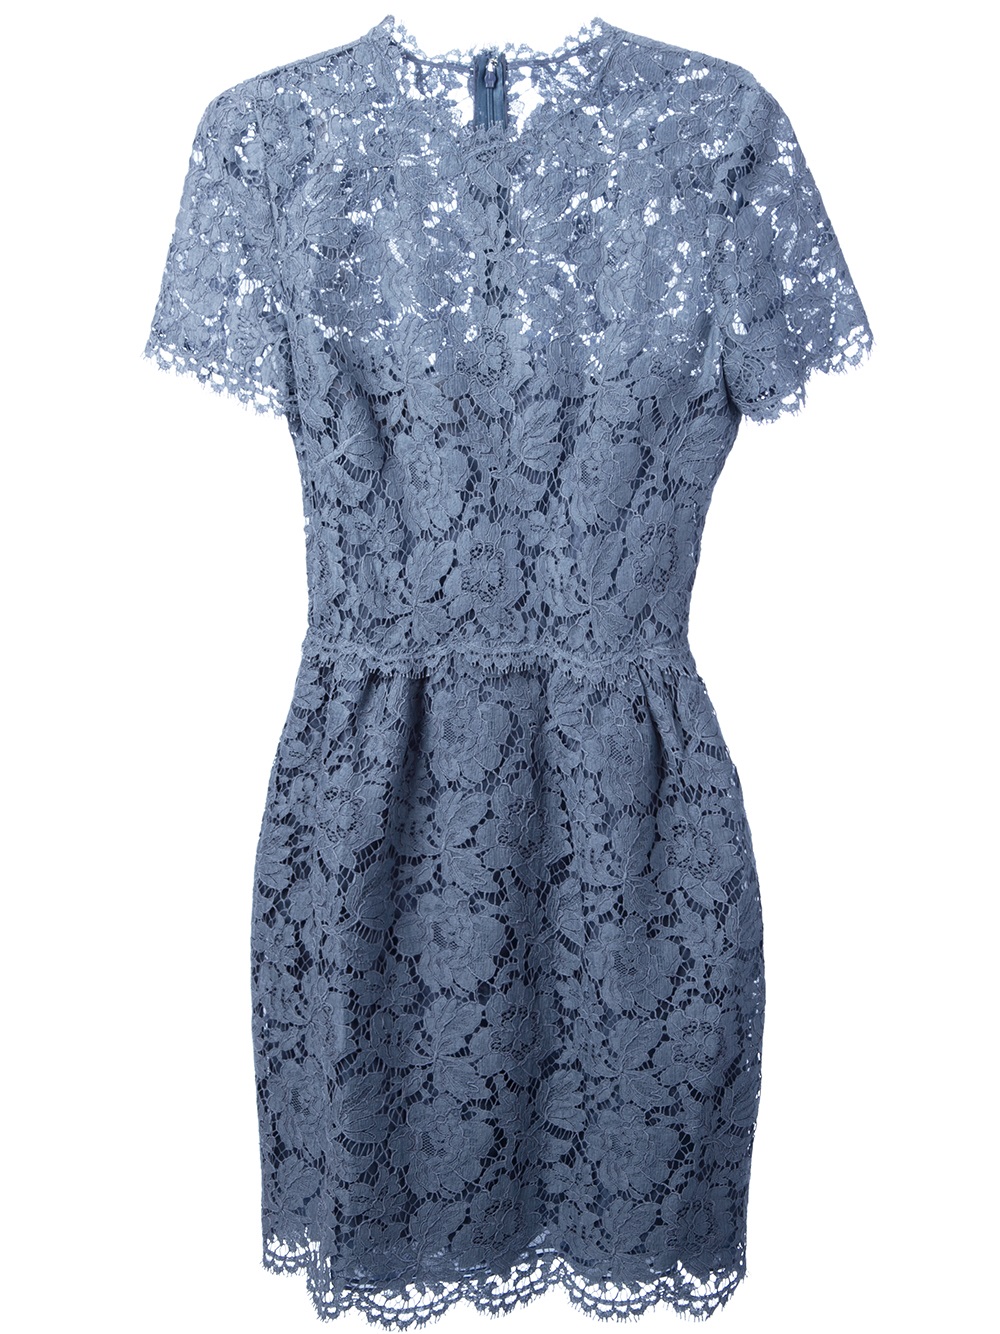 Valentino Lace Dress in Blue - Lyst